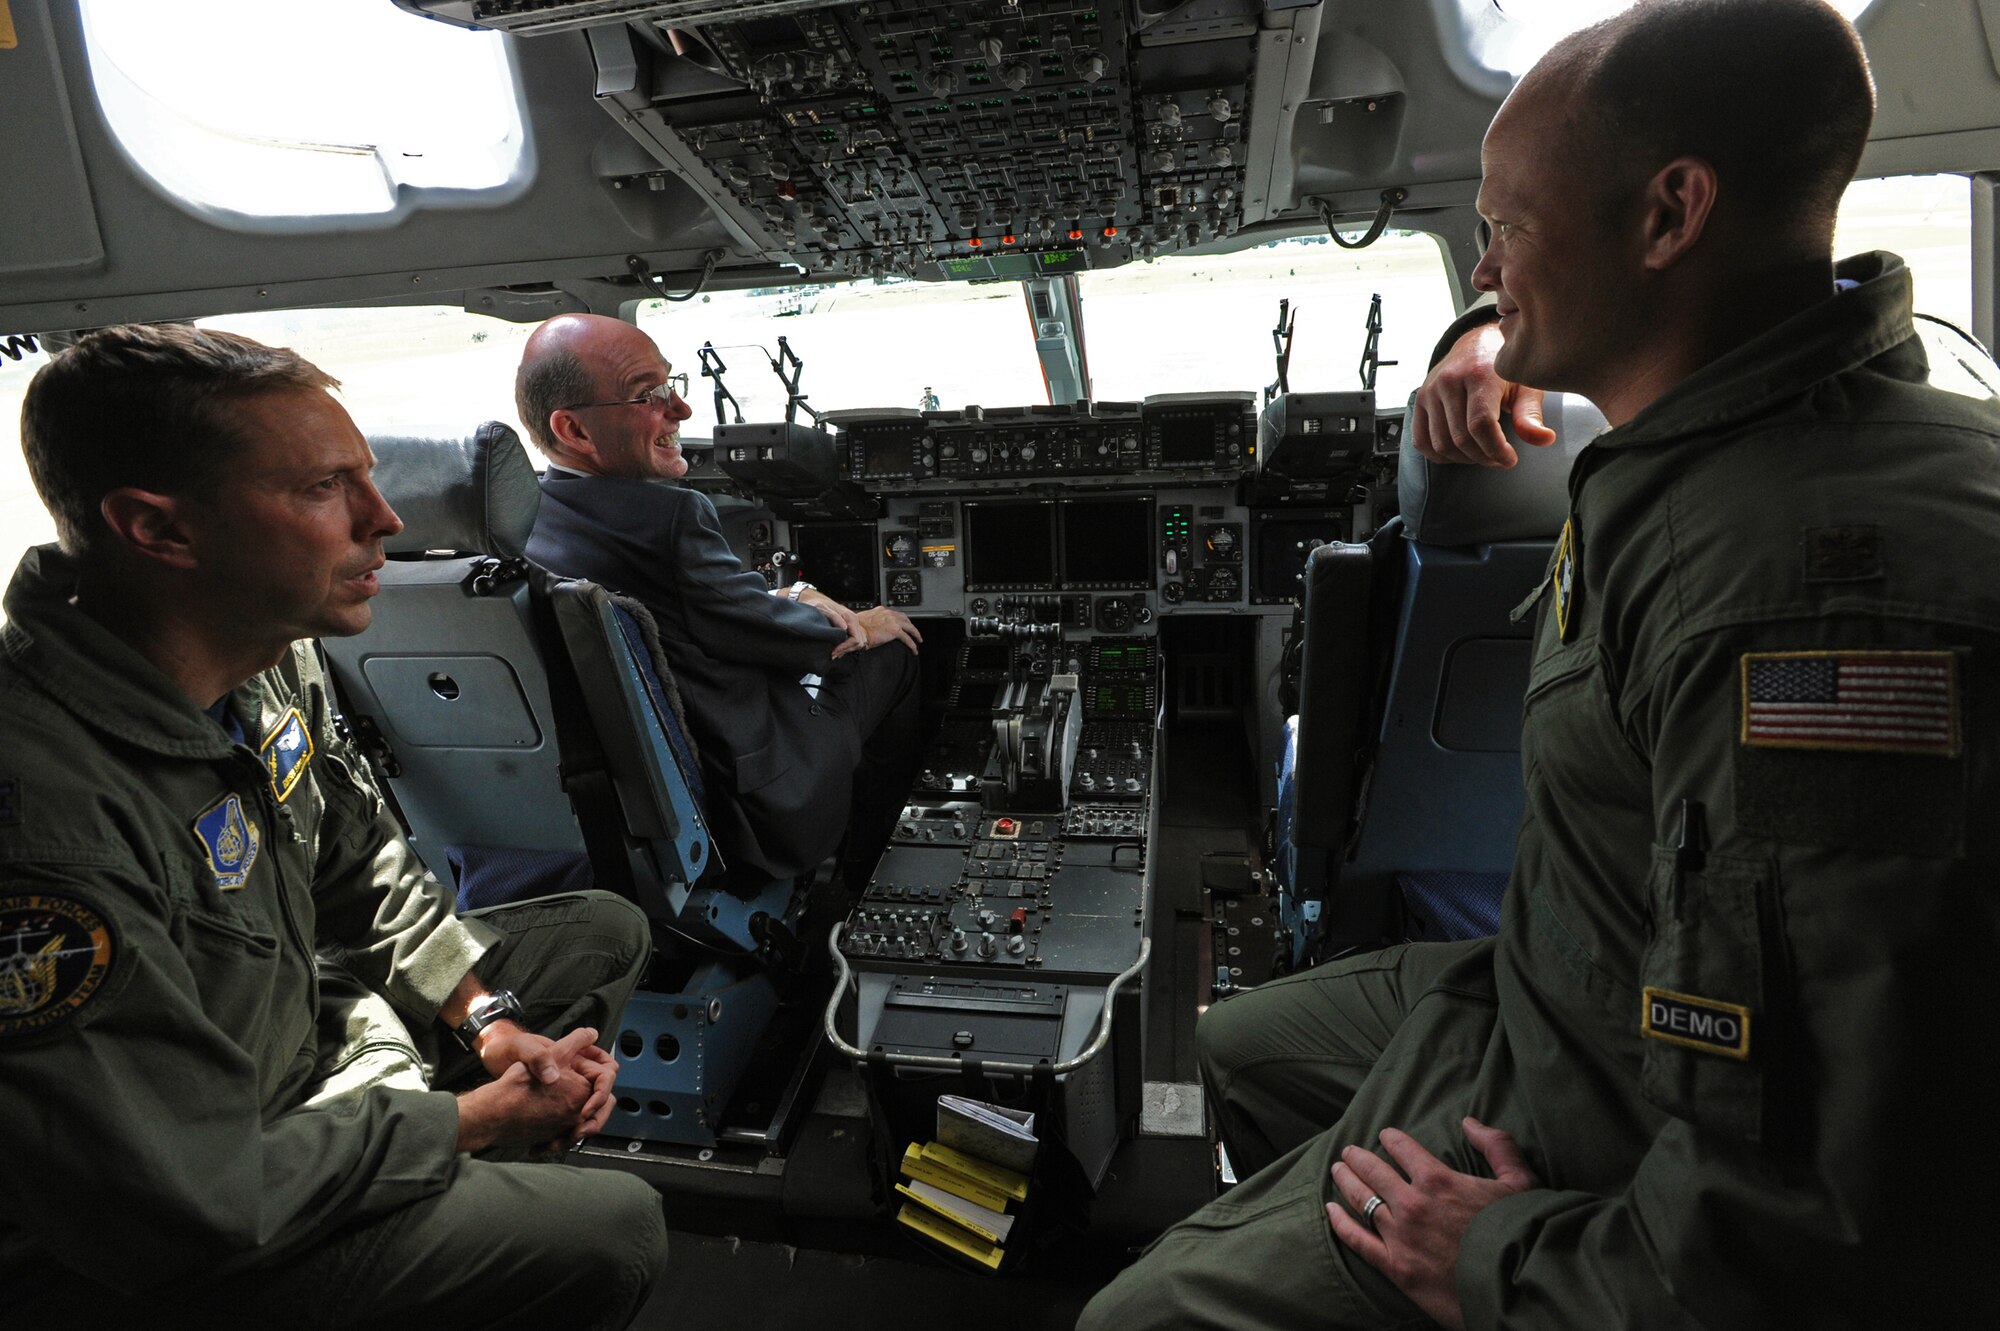 Pacific Air Forces demonstration team members Capt. Rush Taylor, demo safety ground control officer, left, and Maj. Chris Ross, demo copilot, right, shows U.S. Ambassador to Brunei Daniel L. Shields, center, his way around the cockpit of a C-17 Globemaster III at Rimba Air Base during the 4th biennial Brunei Darussalam International Defense Exhibition, Dec. 3, 2013. JBPPH personnel will be showcasing the C-17 through static displays and aerial demonstrations during BRIDEX. The exhibition is an opportunity for networking and sharing technology with regional partners and allies, building strong multilateral relationships, increased cooperation and enhanced preparedness for disasters and other contingency operations. (U.S. Air Force photo/Master Sgt. Jerome S. Tayborn)